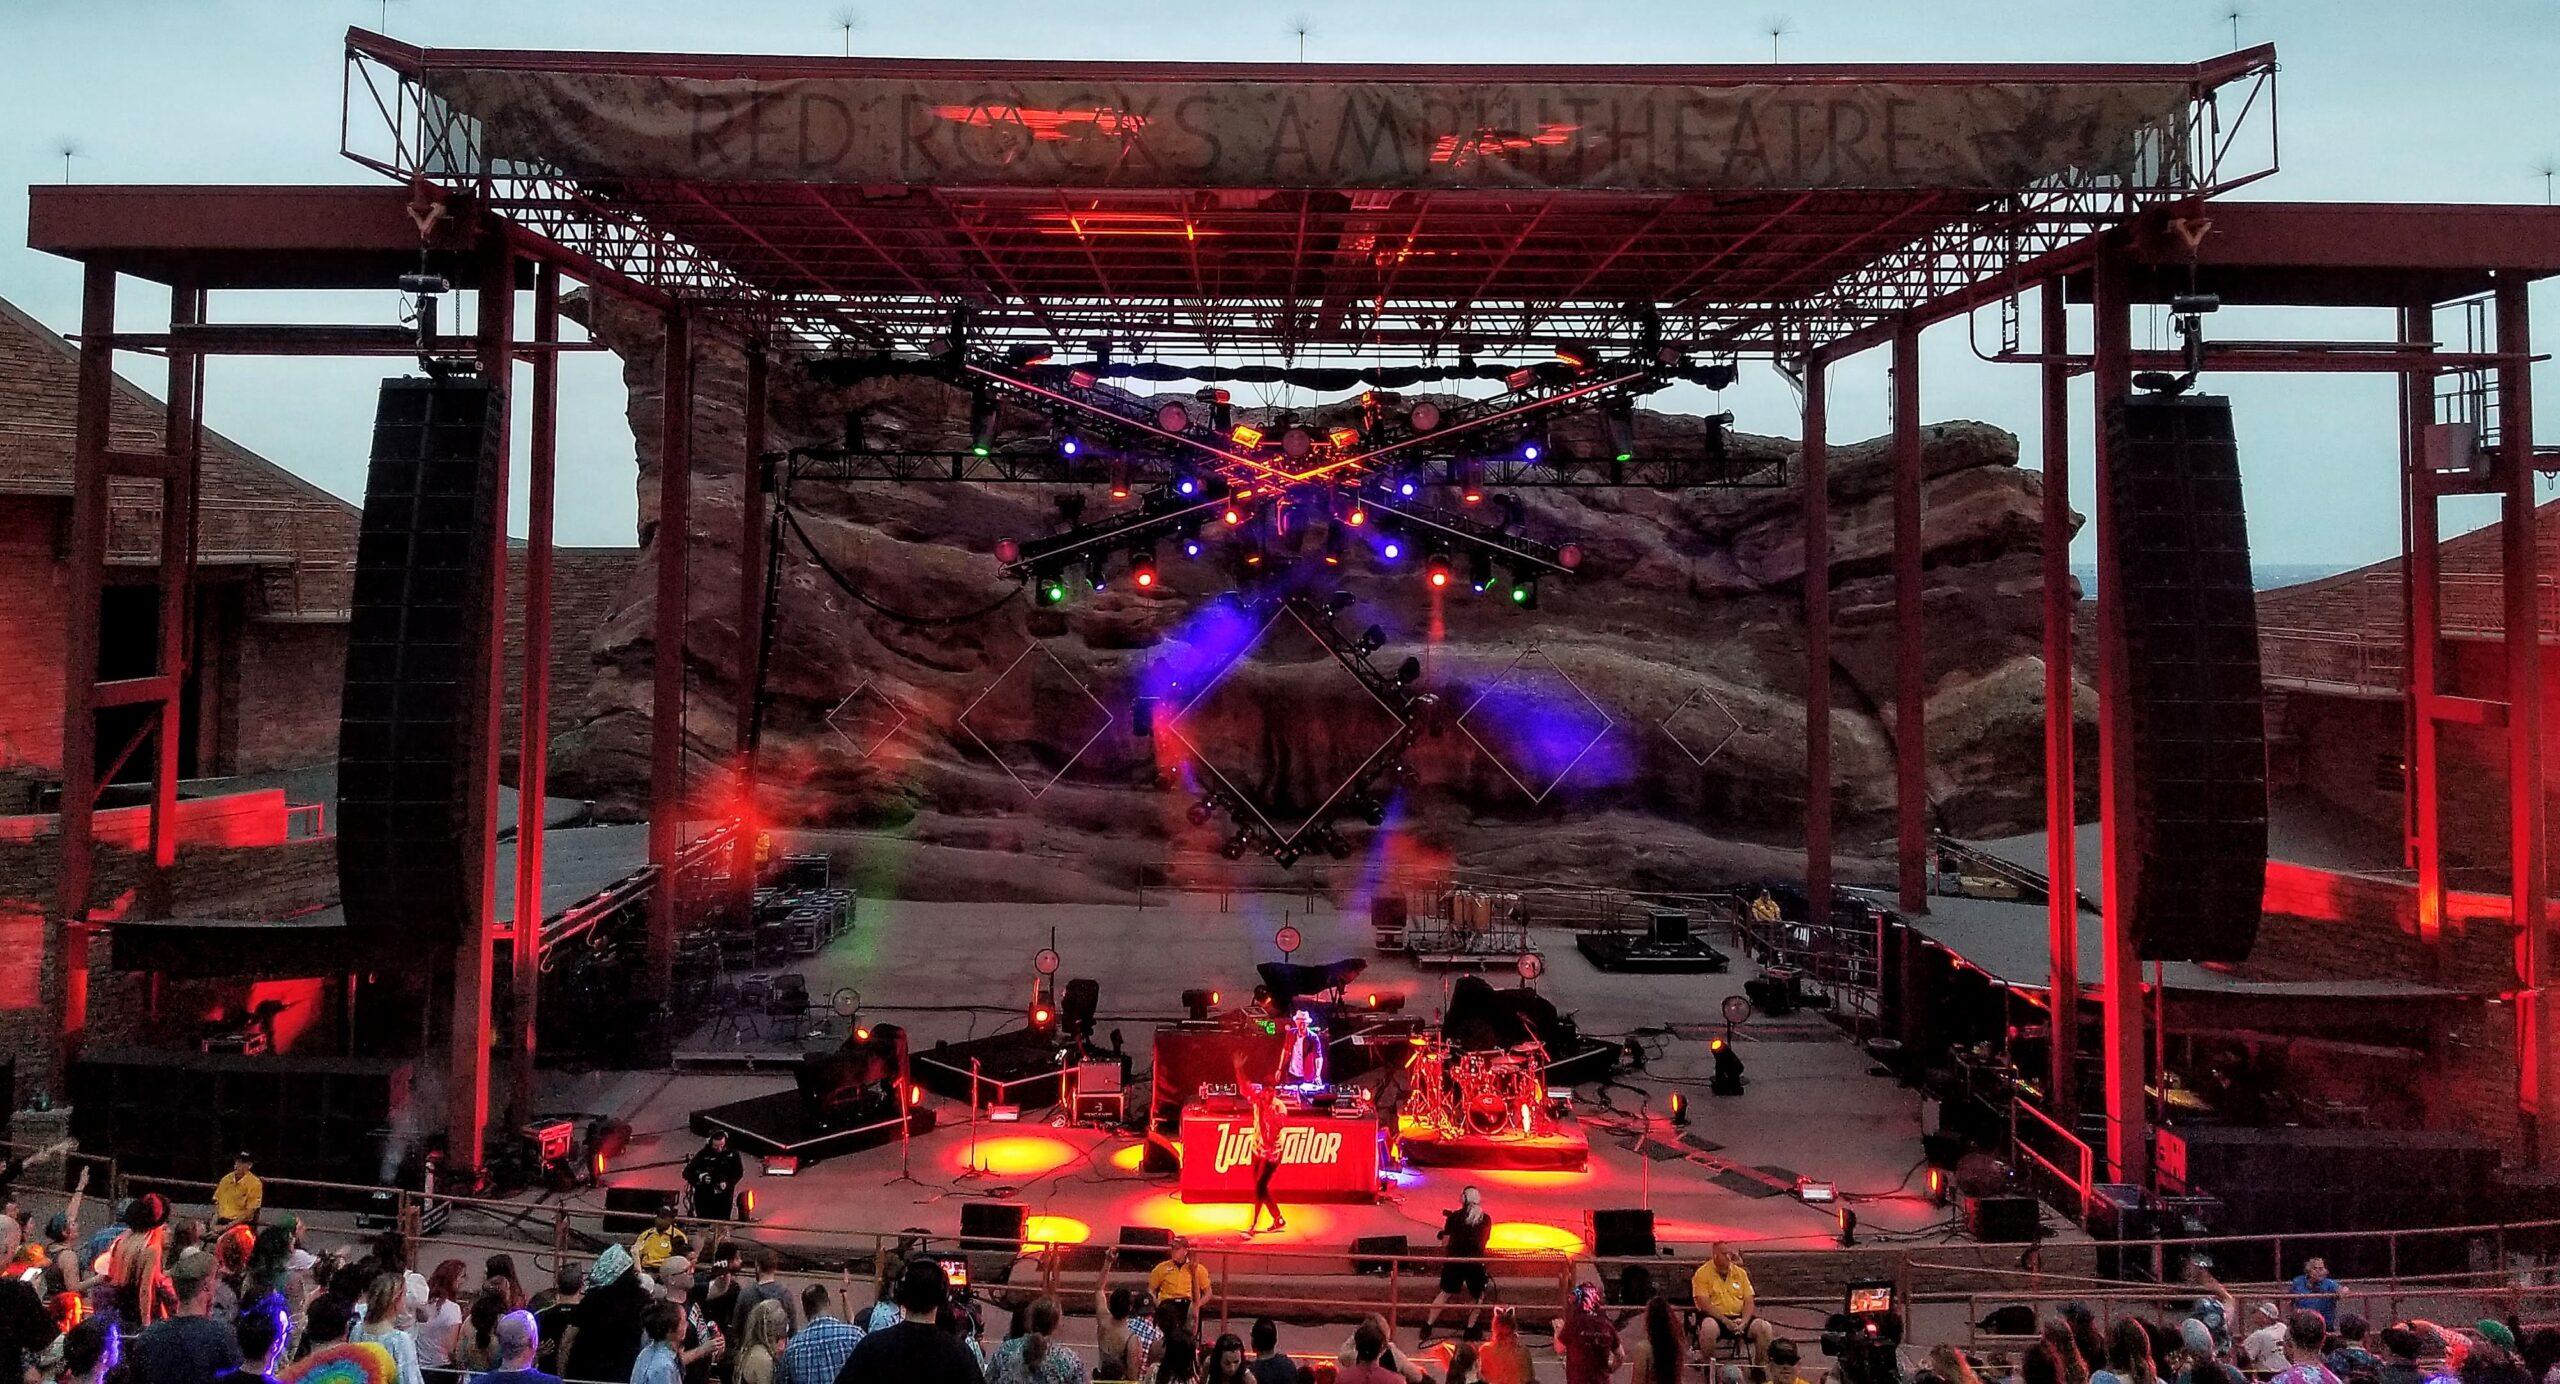 Wax Tailor performing at Red Rocks Amphitheatre. Photo by: Matthew McGuire